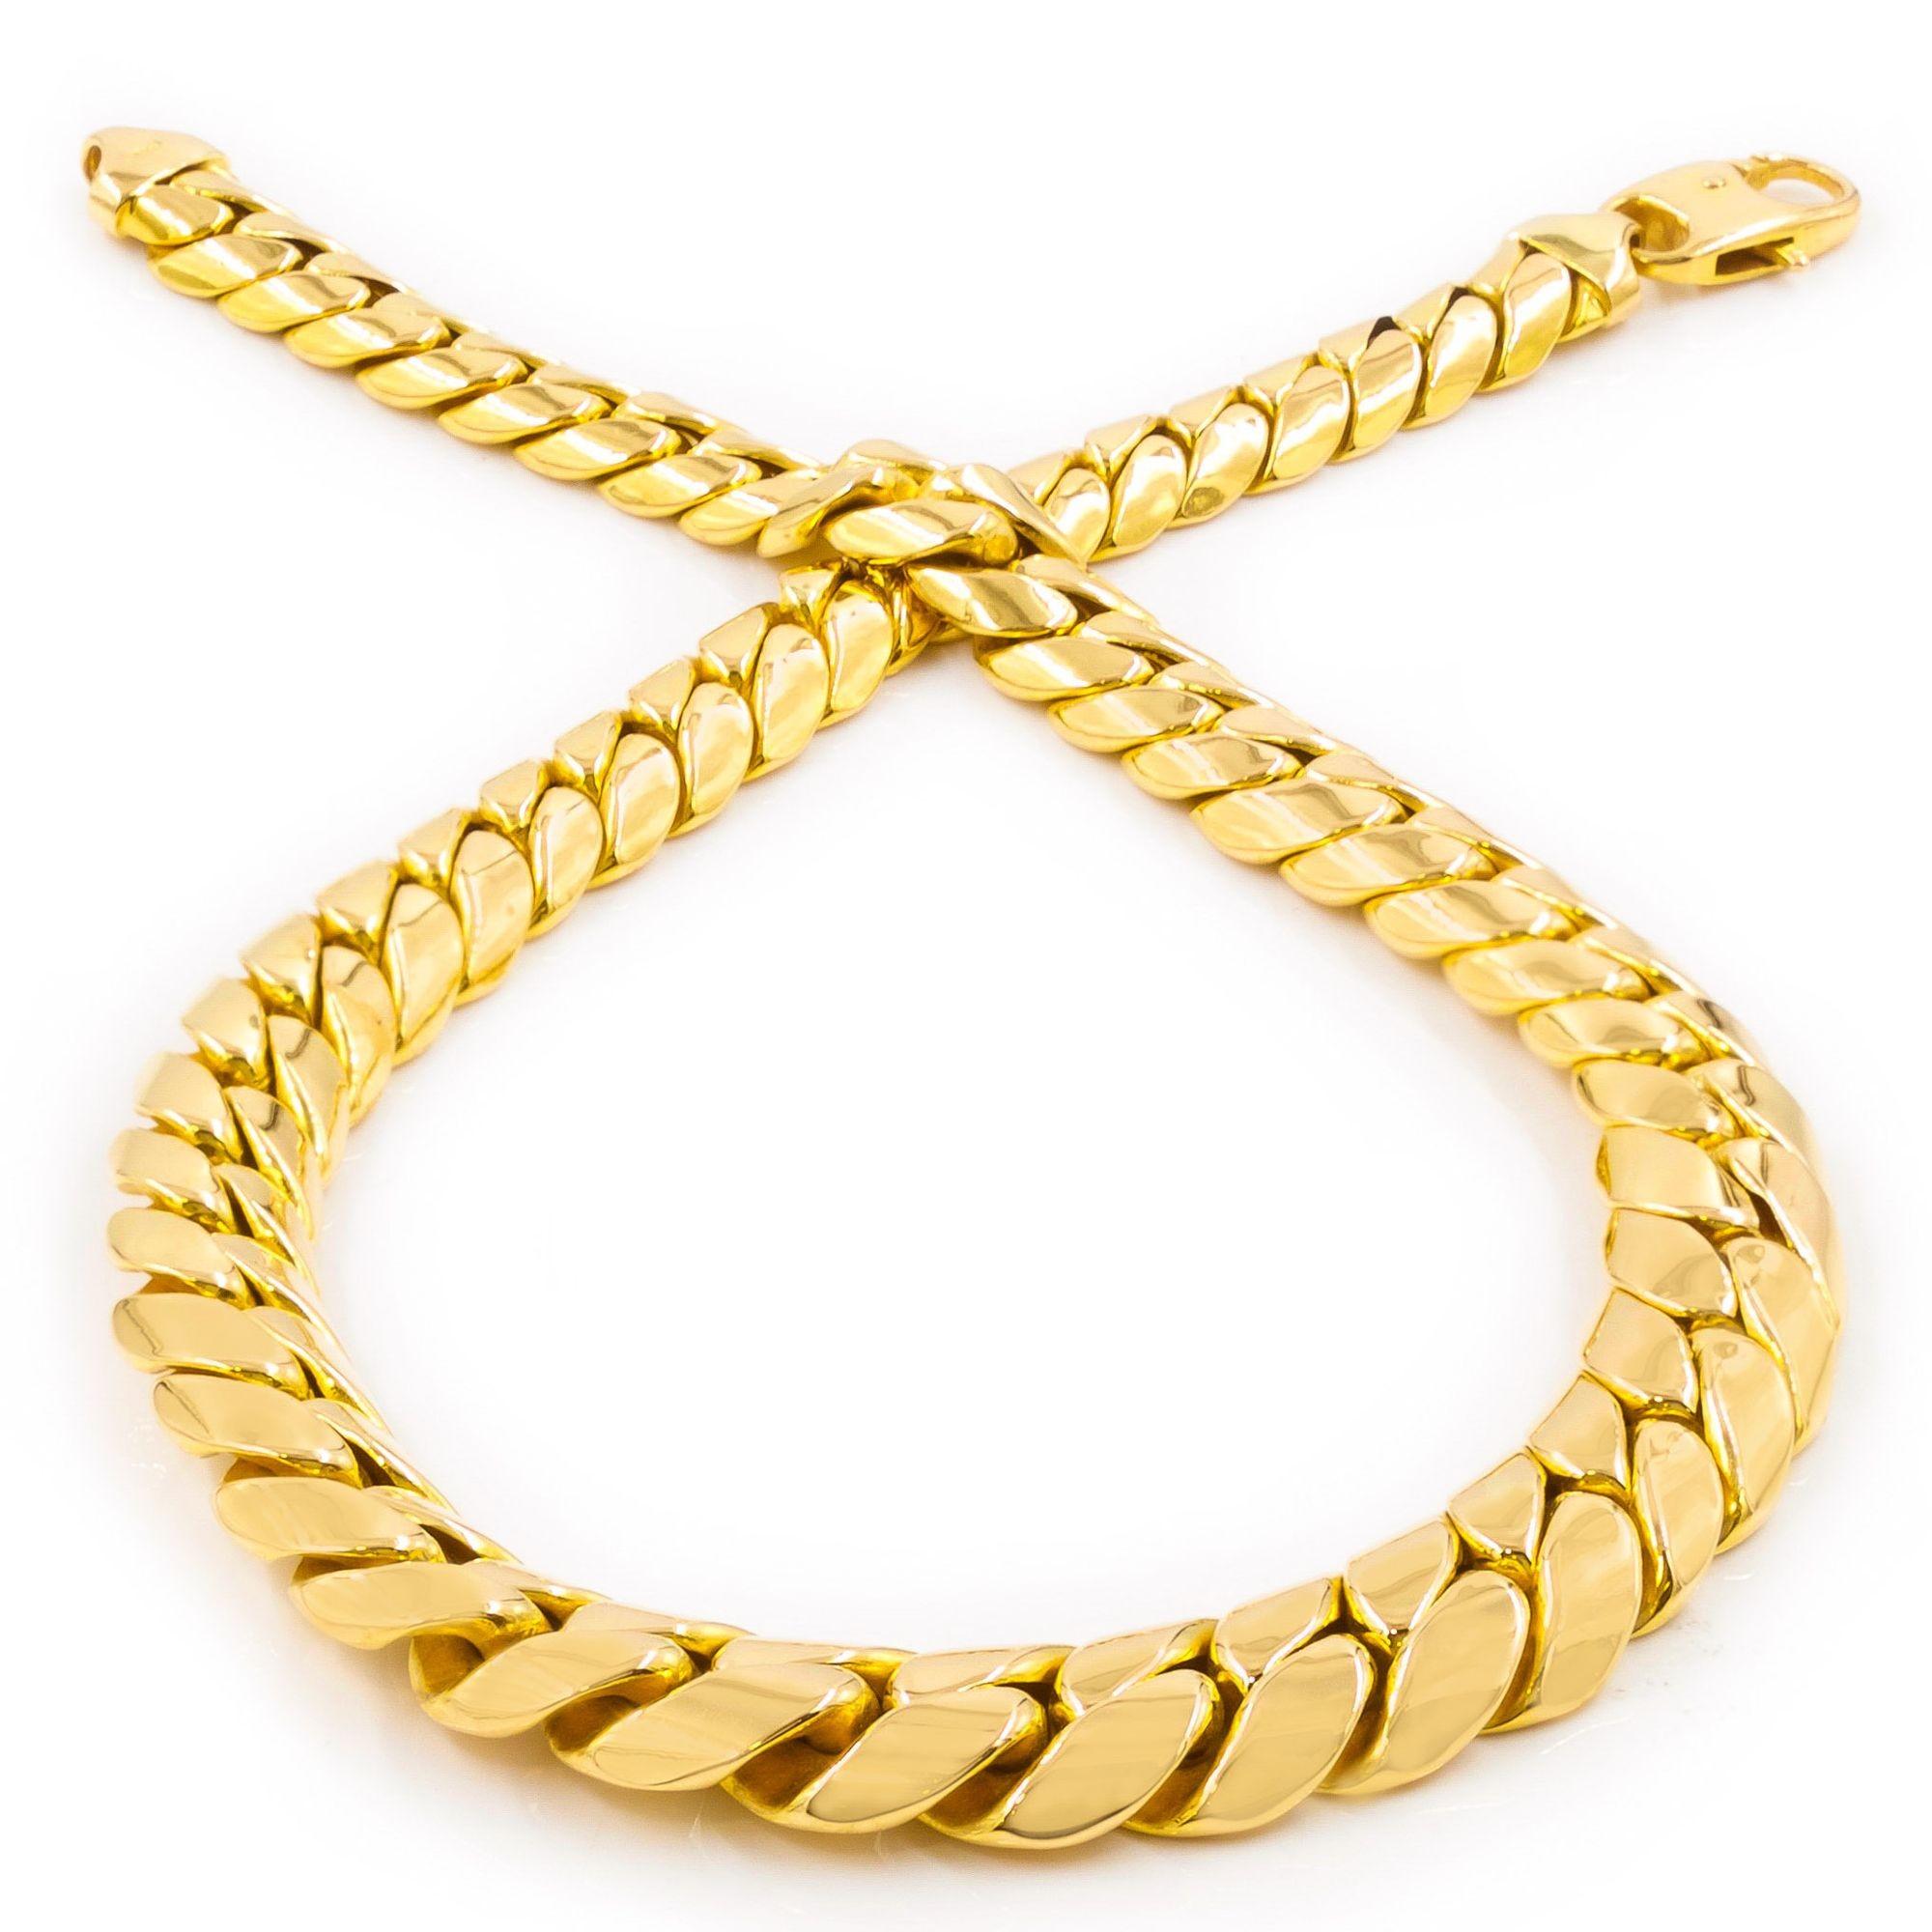 Entirely executed in 14 karat yellow gd with a brilliant-pish, this slinky necklace is composed of graduated hlow cast links set in a herringbone pattern affixing with a lobster clasp. It weighs in at an overall hefty 49.1 grams and wears